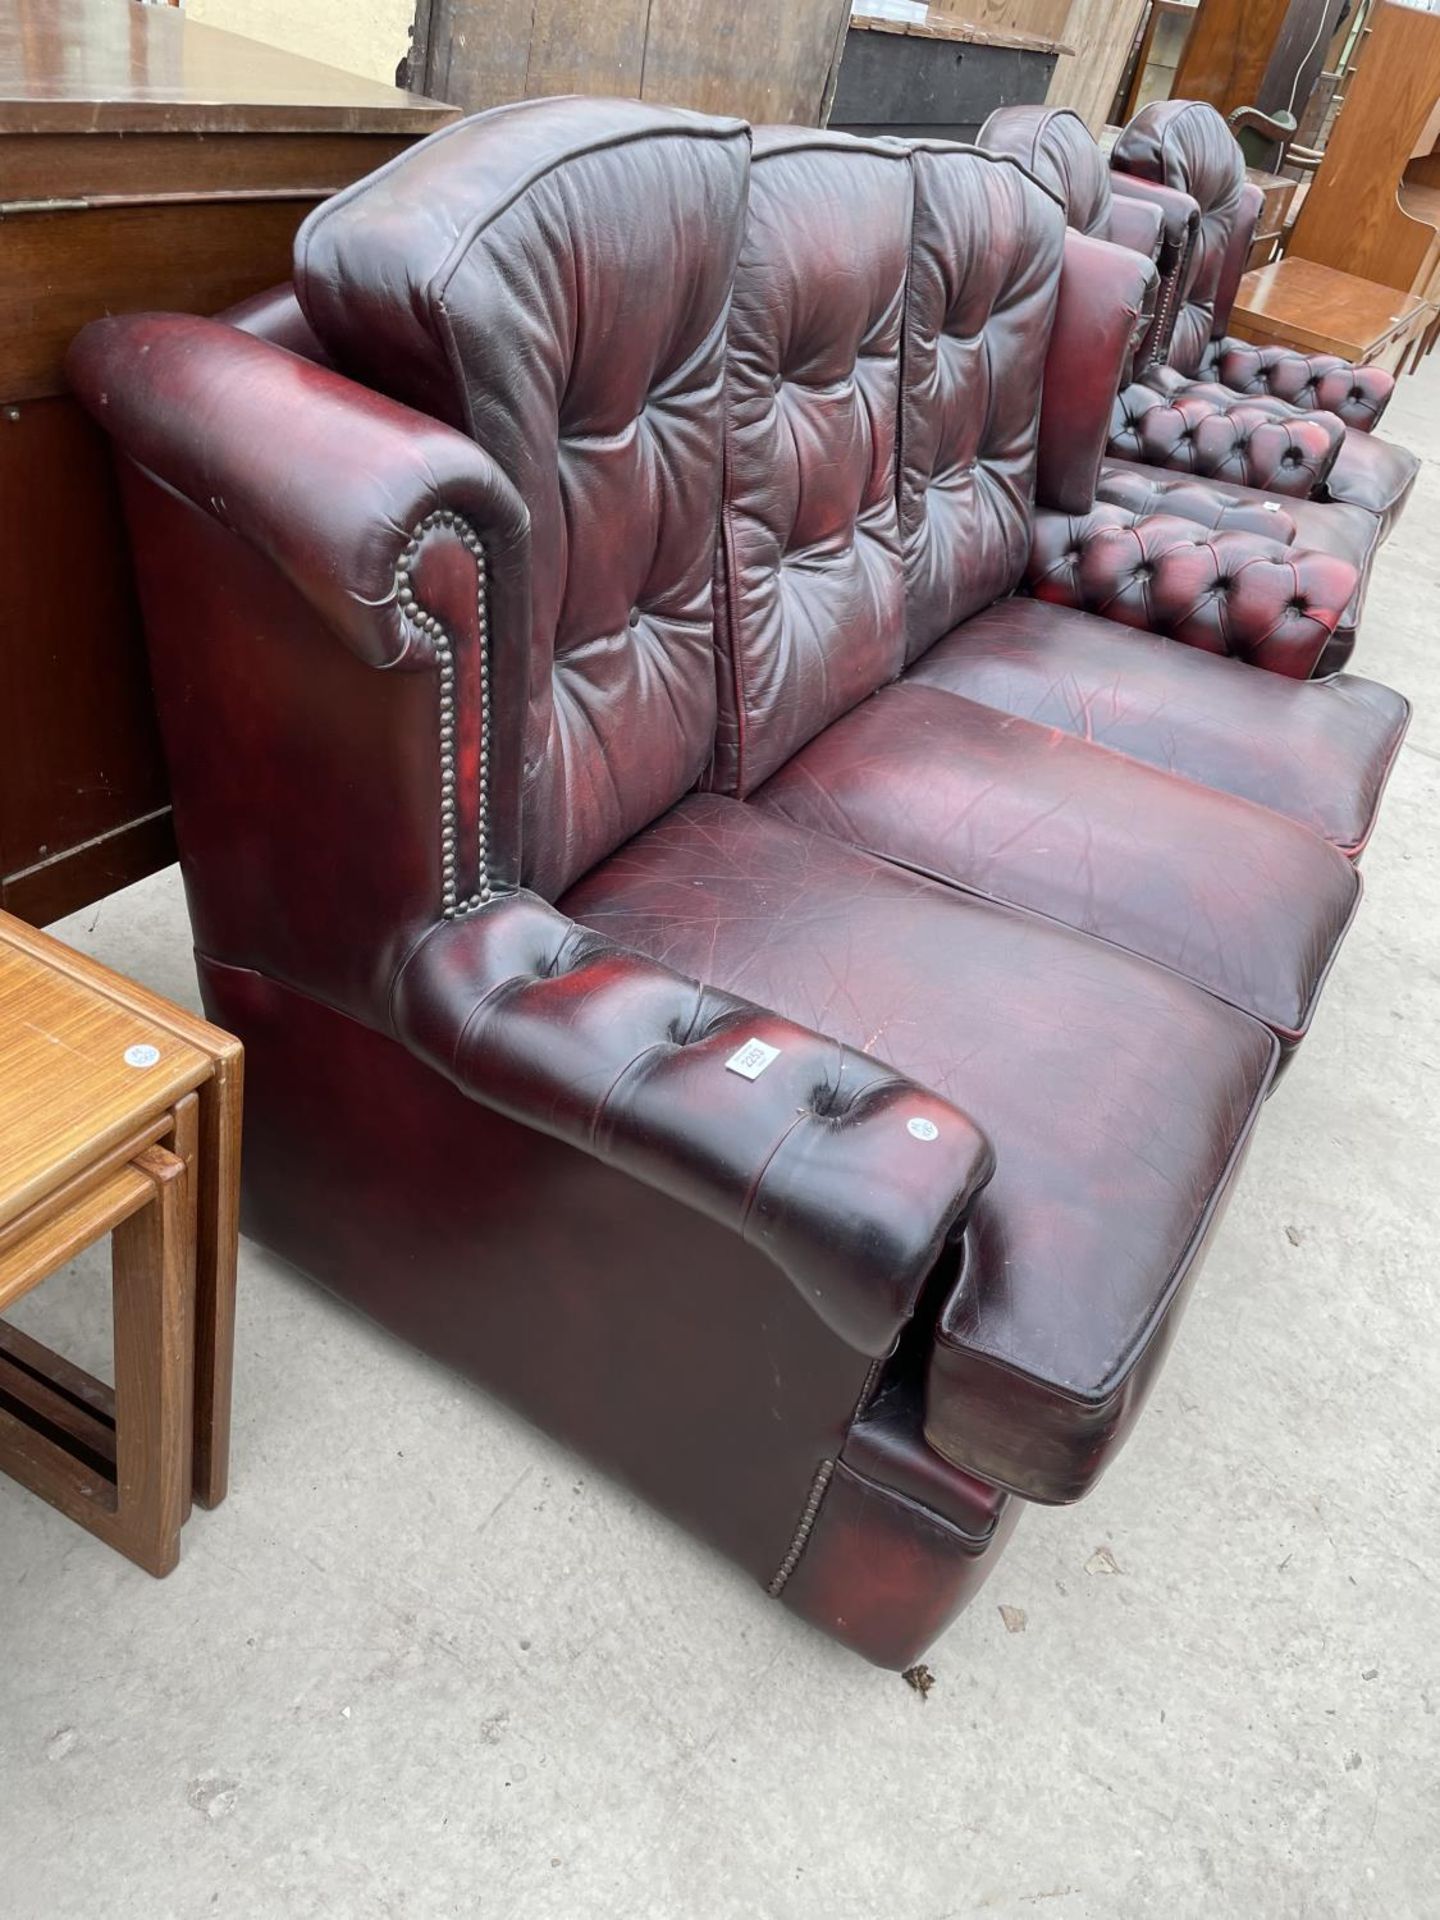 AN OXBLOOD LEATHER THREE SEATER SOFA WITH BUTTONED BACK AND ARMS - Image 6 of 6